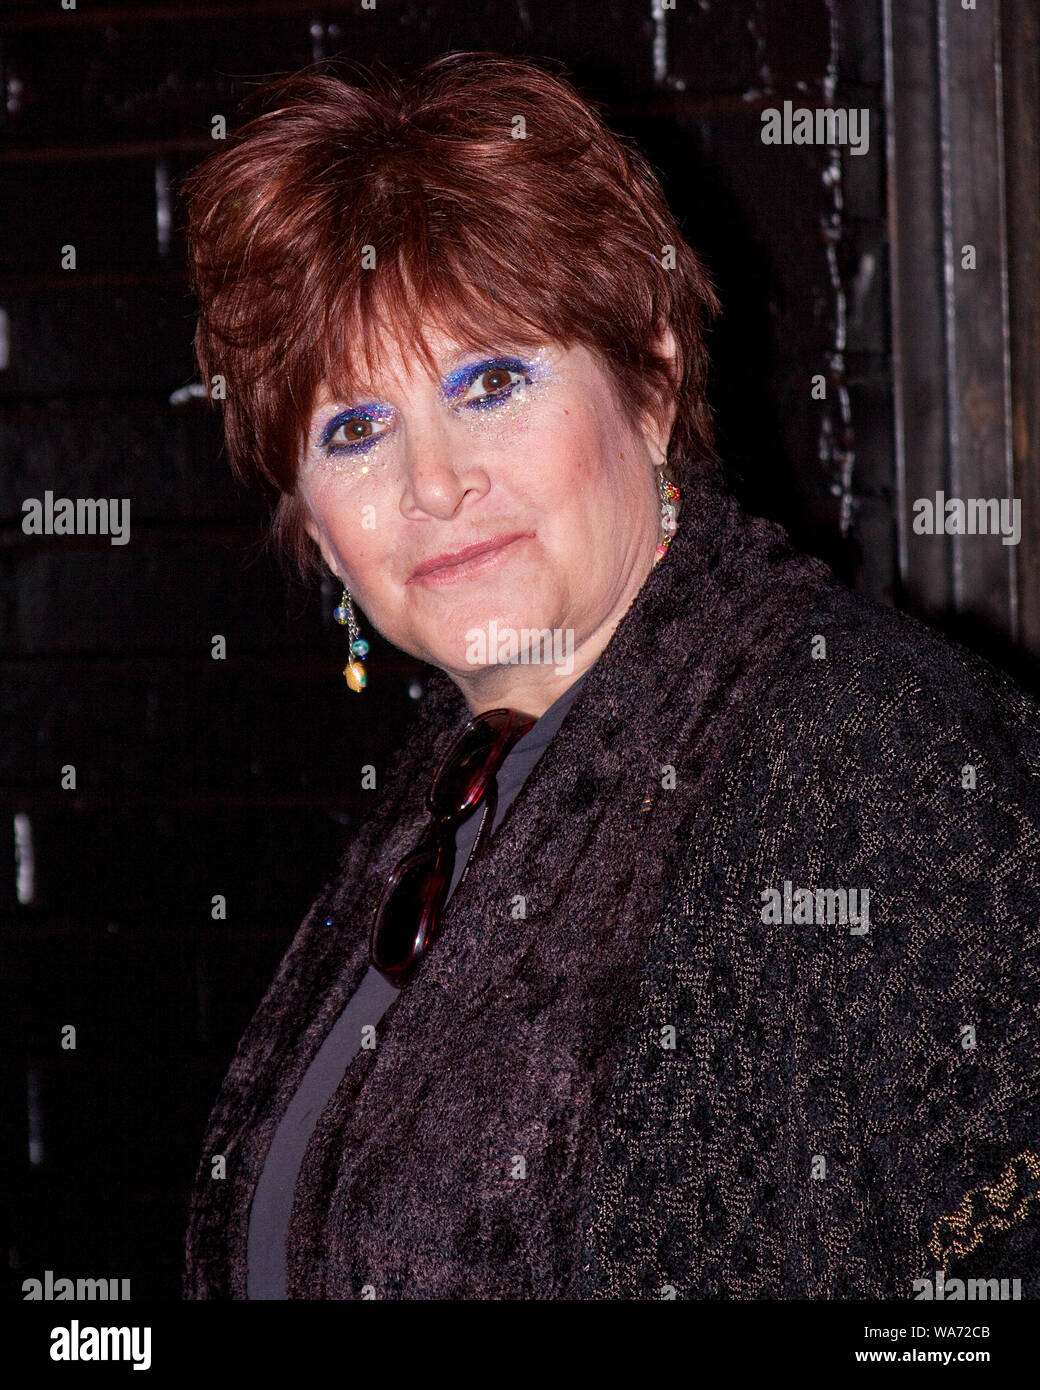 The late Carrie Fisher, known worldwide for her role of Princess Leia in the Star Wars films, leaving her show based on her book 'Wishful Drinking' Stock Photo